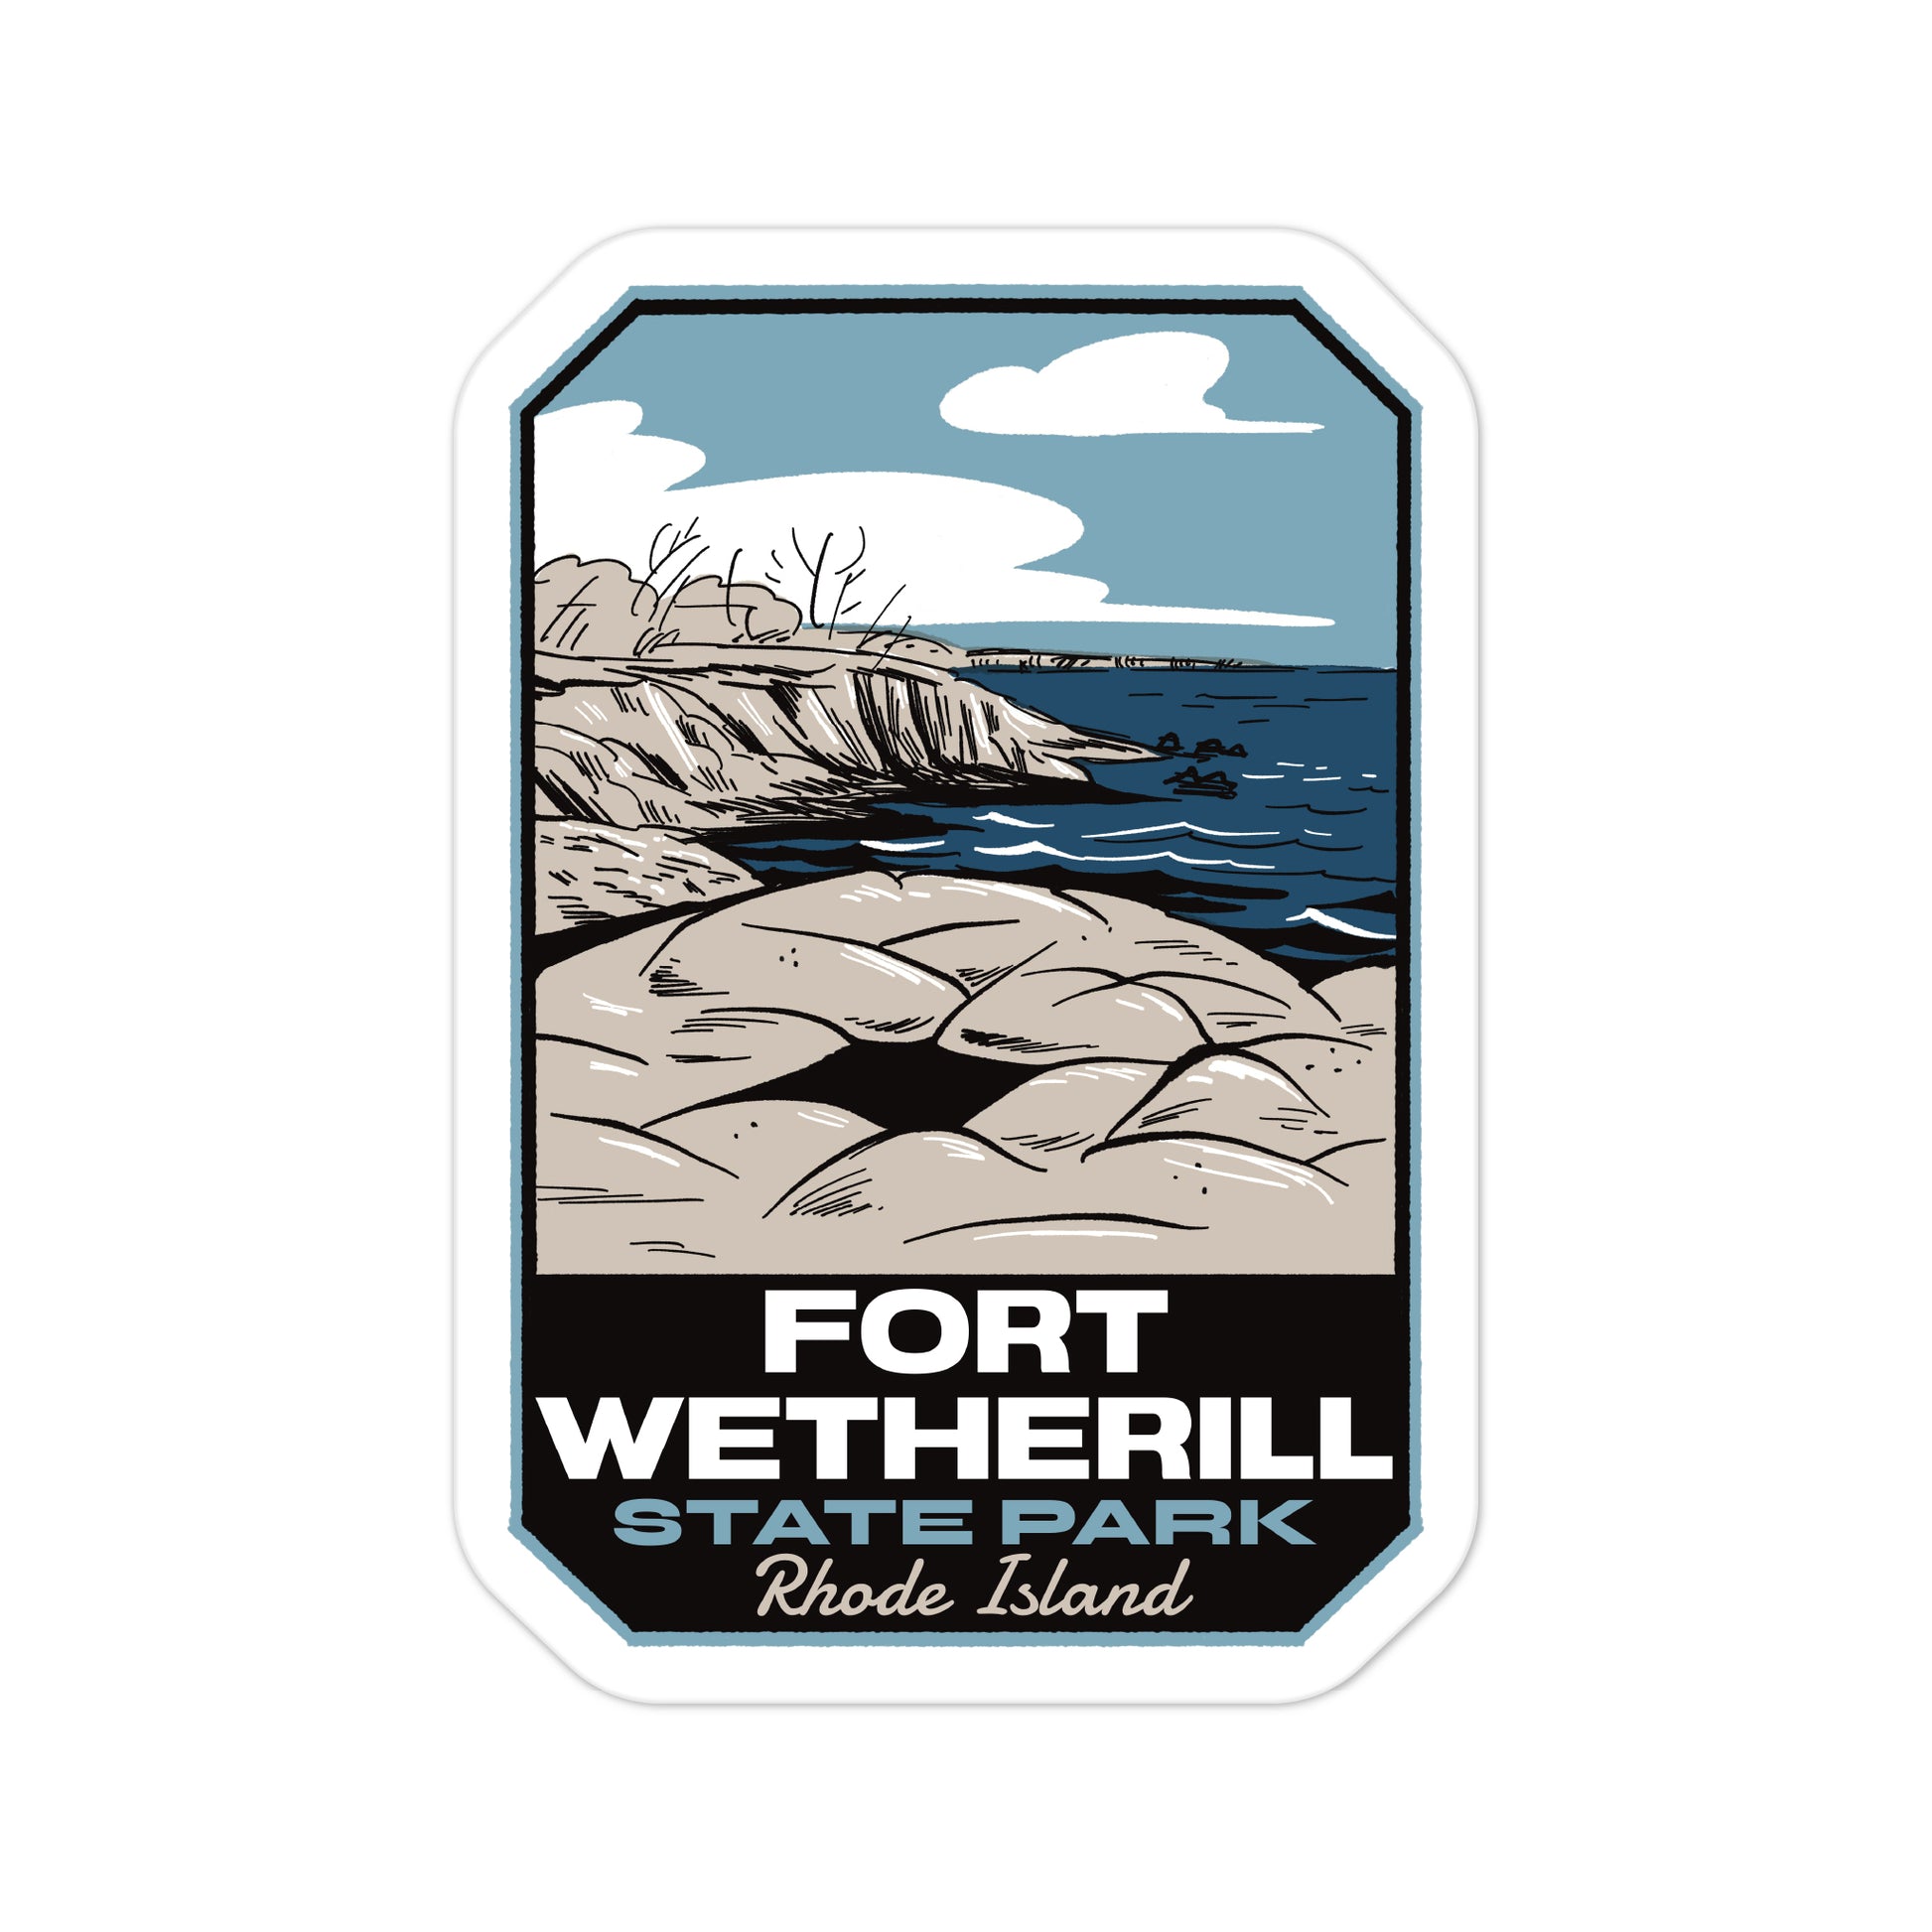 A sticker of Fort Wetherill State Park